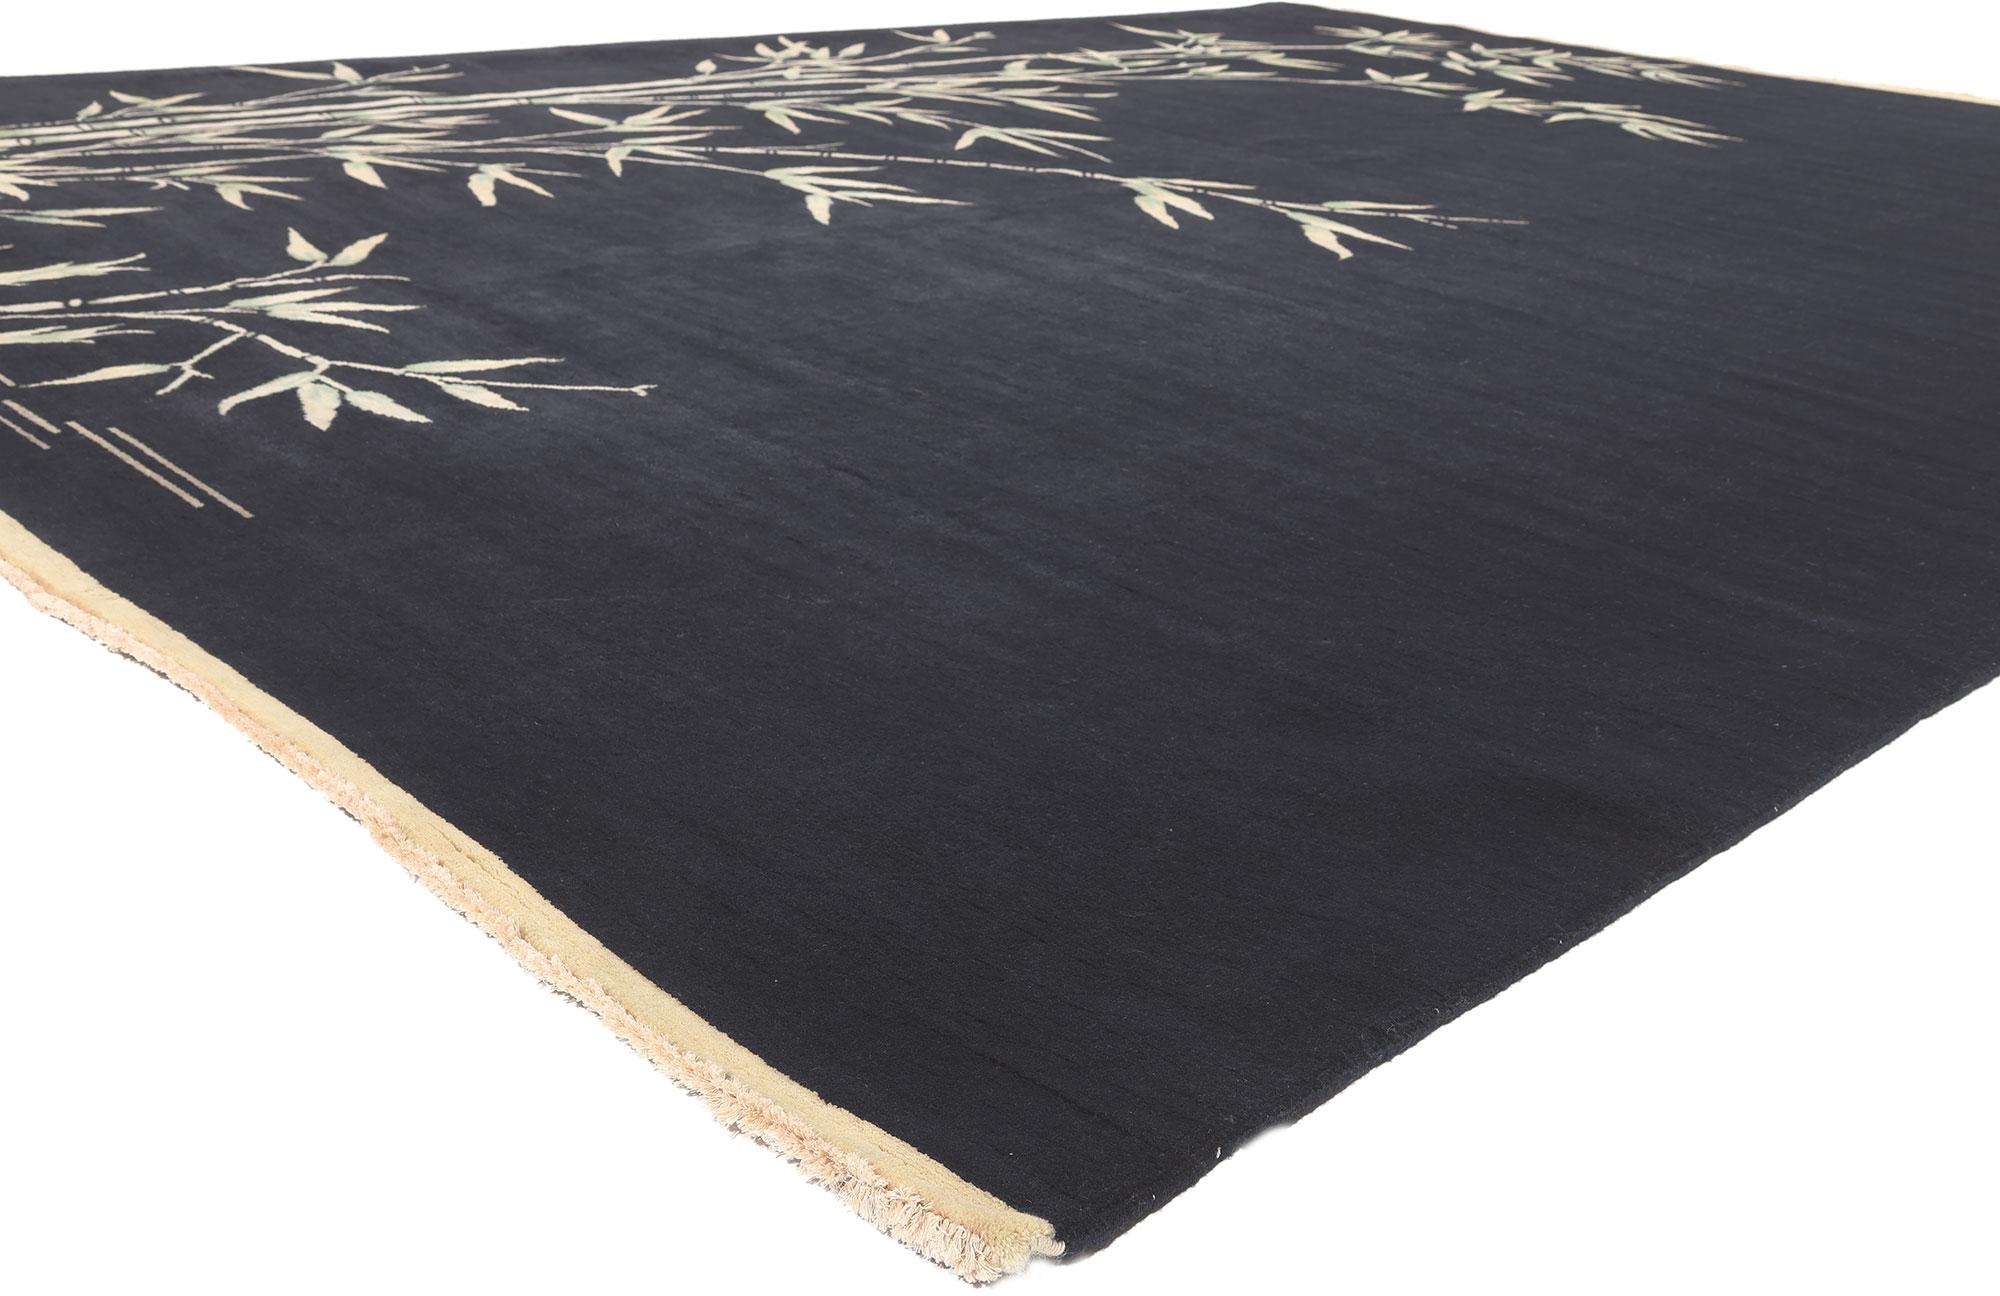 30969 Modern Chinese Art Deco Pictorial Rug, 10'09 x 13'09.
Showcasing a unique bamboo design, incredible detail and texture, this hand knotted wool contemporary Chinese Art Deco style rug is a captivating vision of woven beauty. The landscape